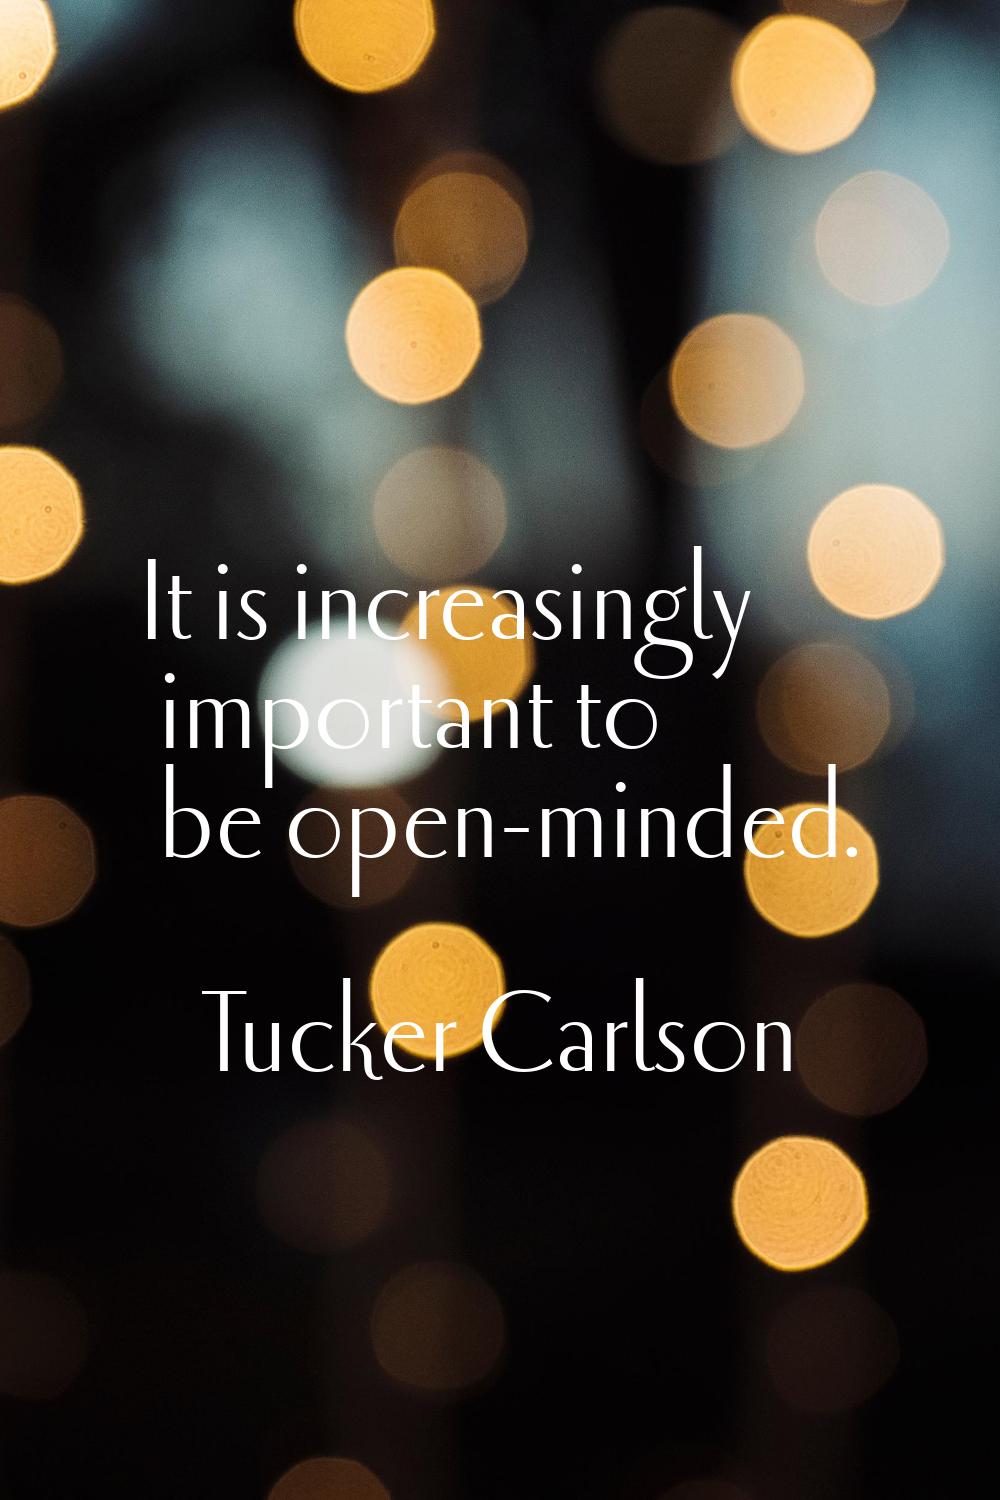 It is increasingly important to be open-minded.